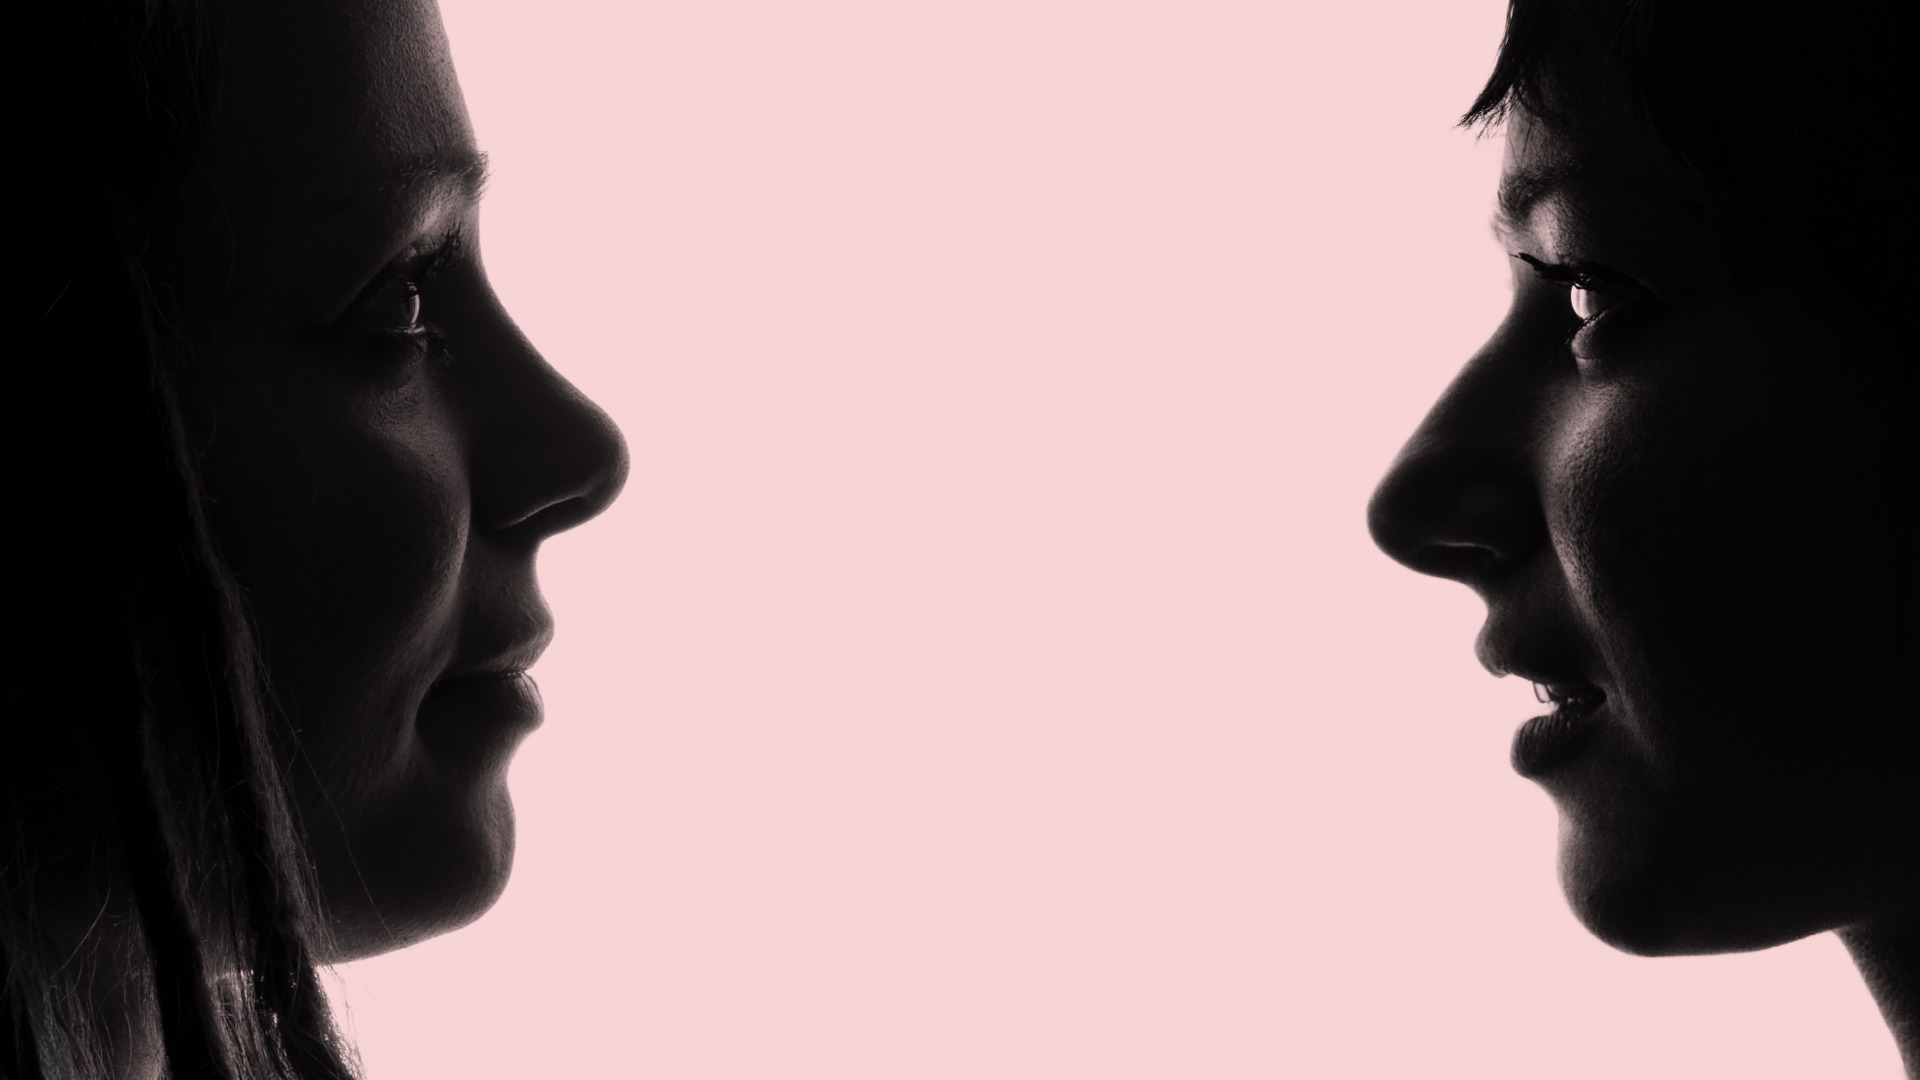 A photo of the silhouette of two women looking at each other with a light pink background